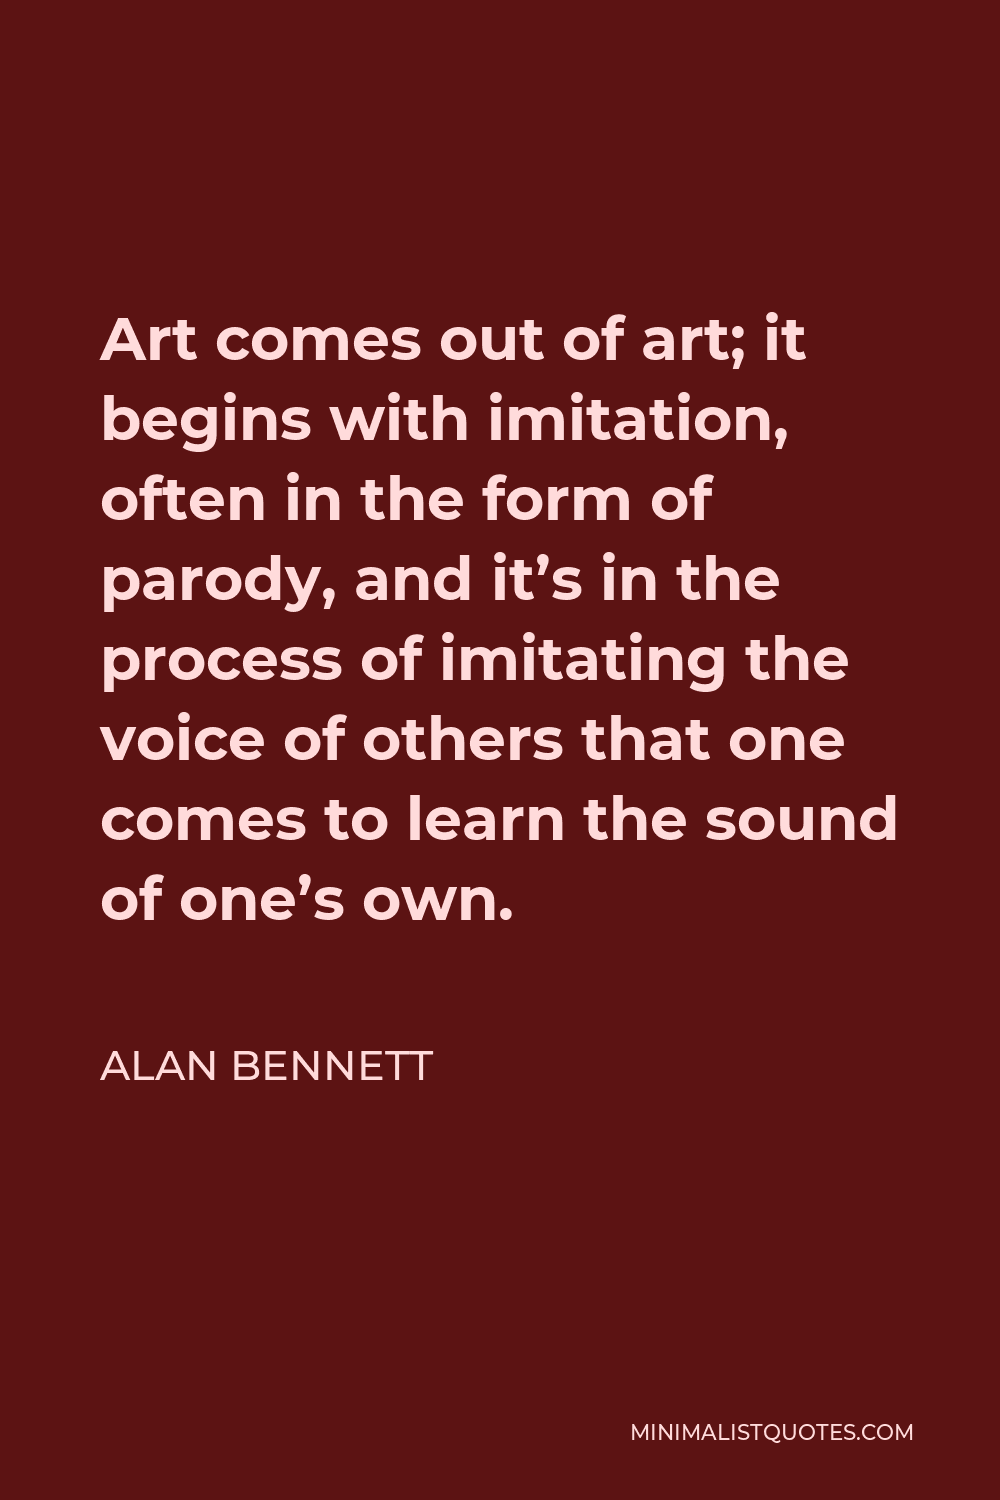 Alan Bennett Quote - Art comes out of art; it begins with imitation, often in the form of parody, and it’s in the process of imitating the voice of others that one comes to learn the sound of one’s own.